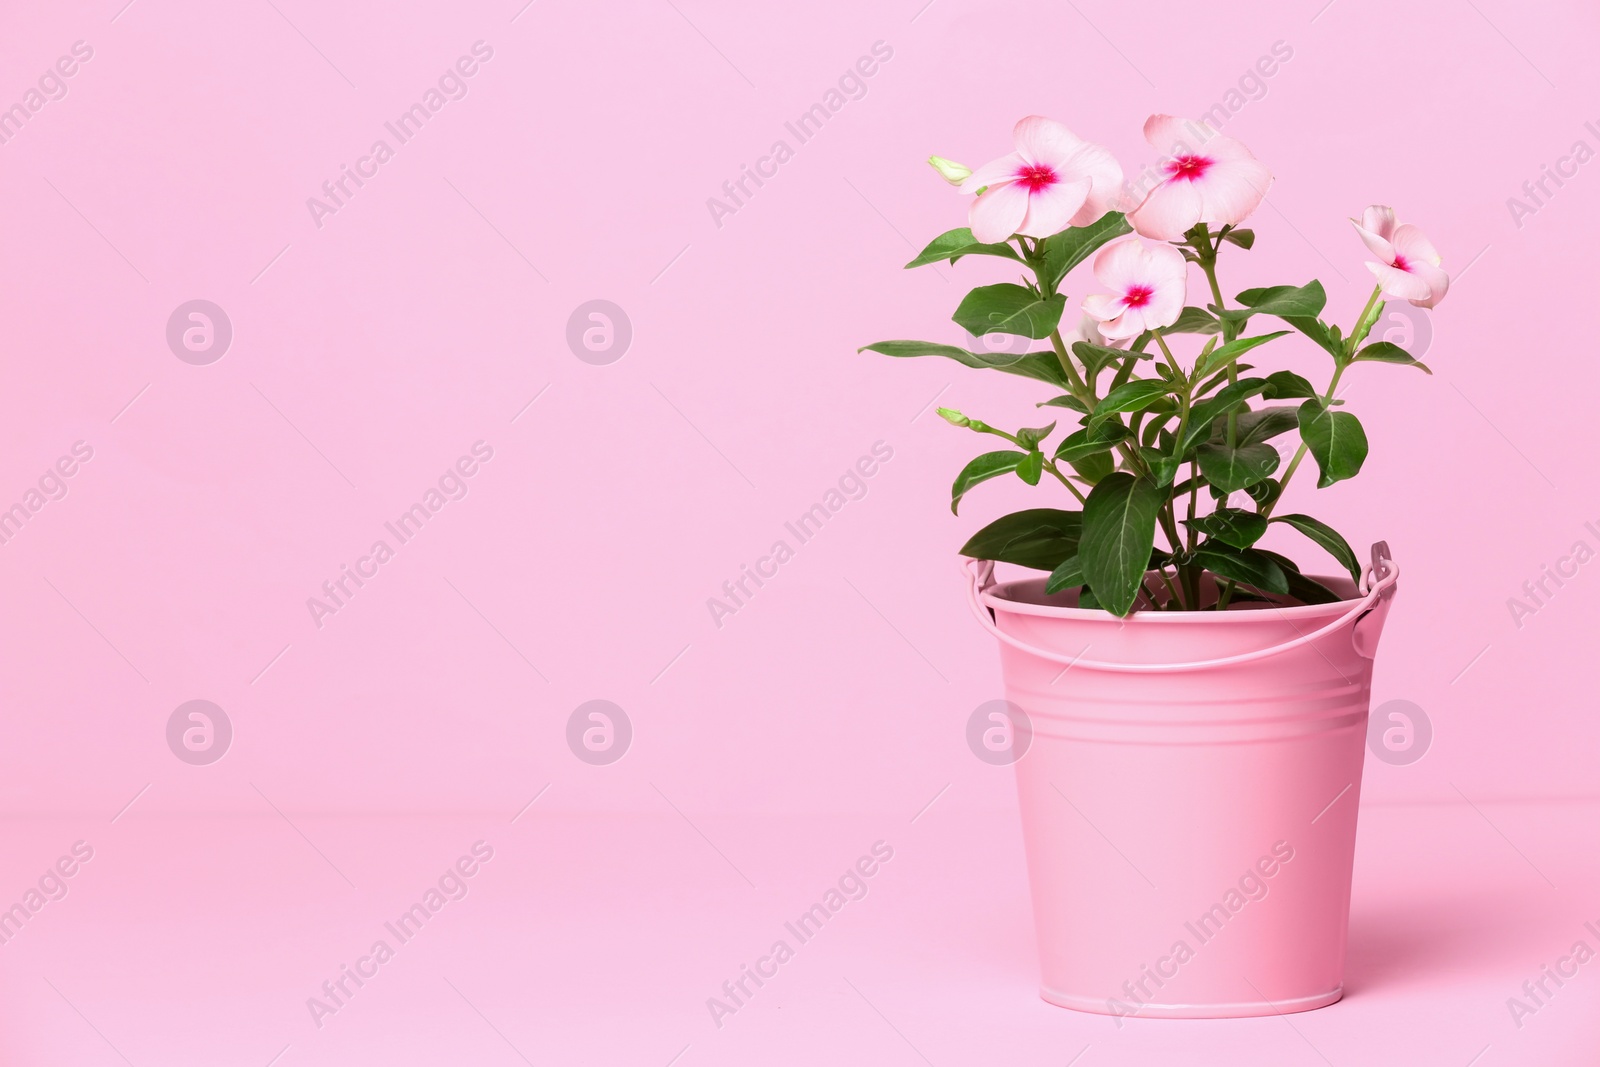 Photo of Catharanthus roseus in flower pot on pink background. Space for text